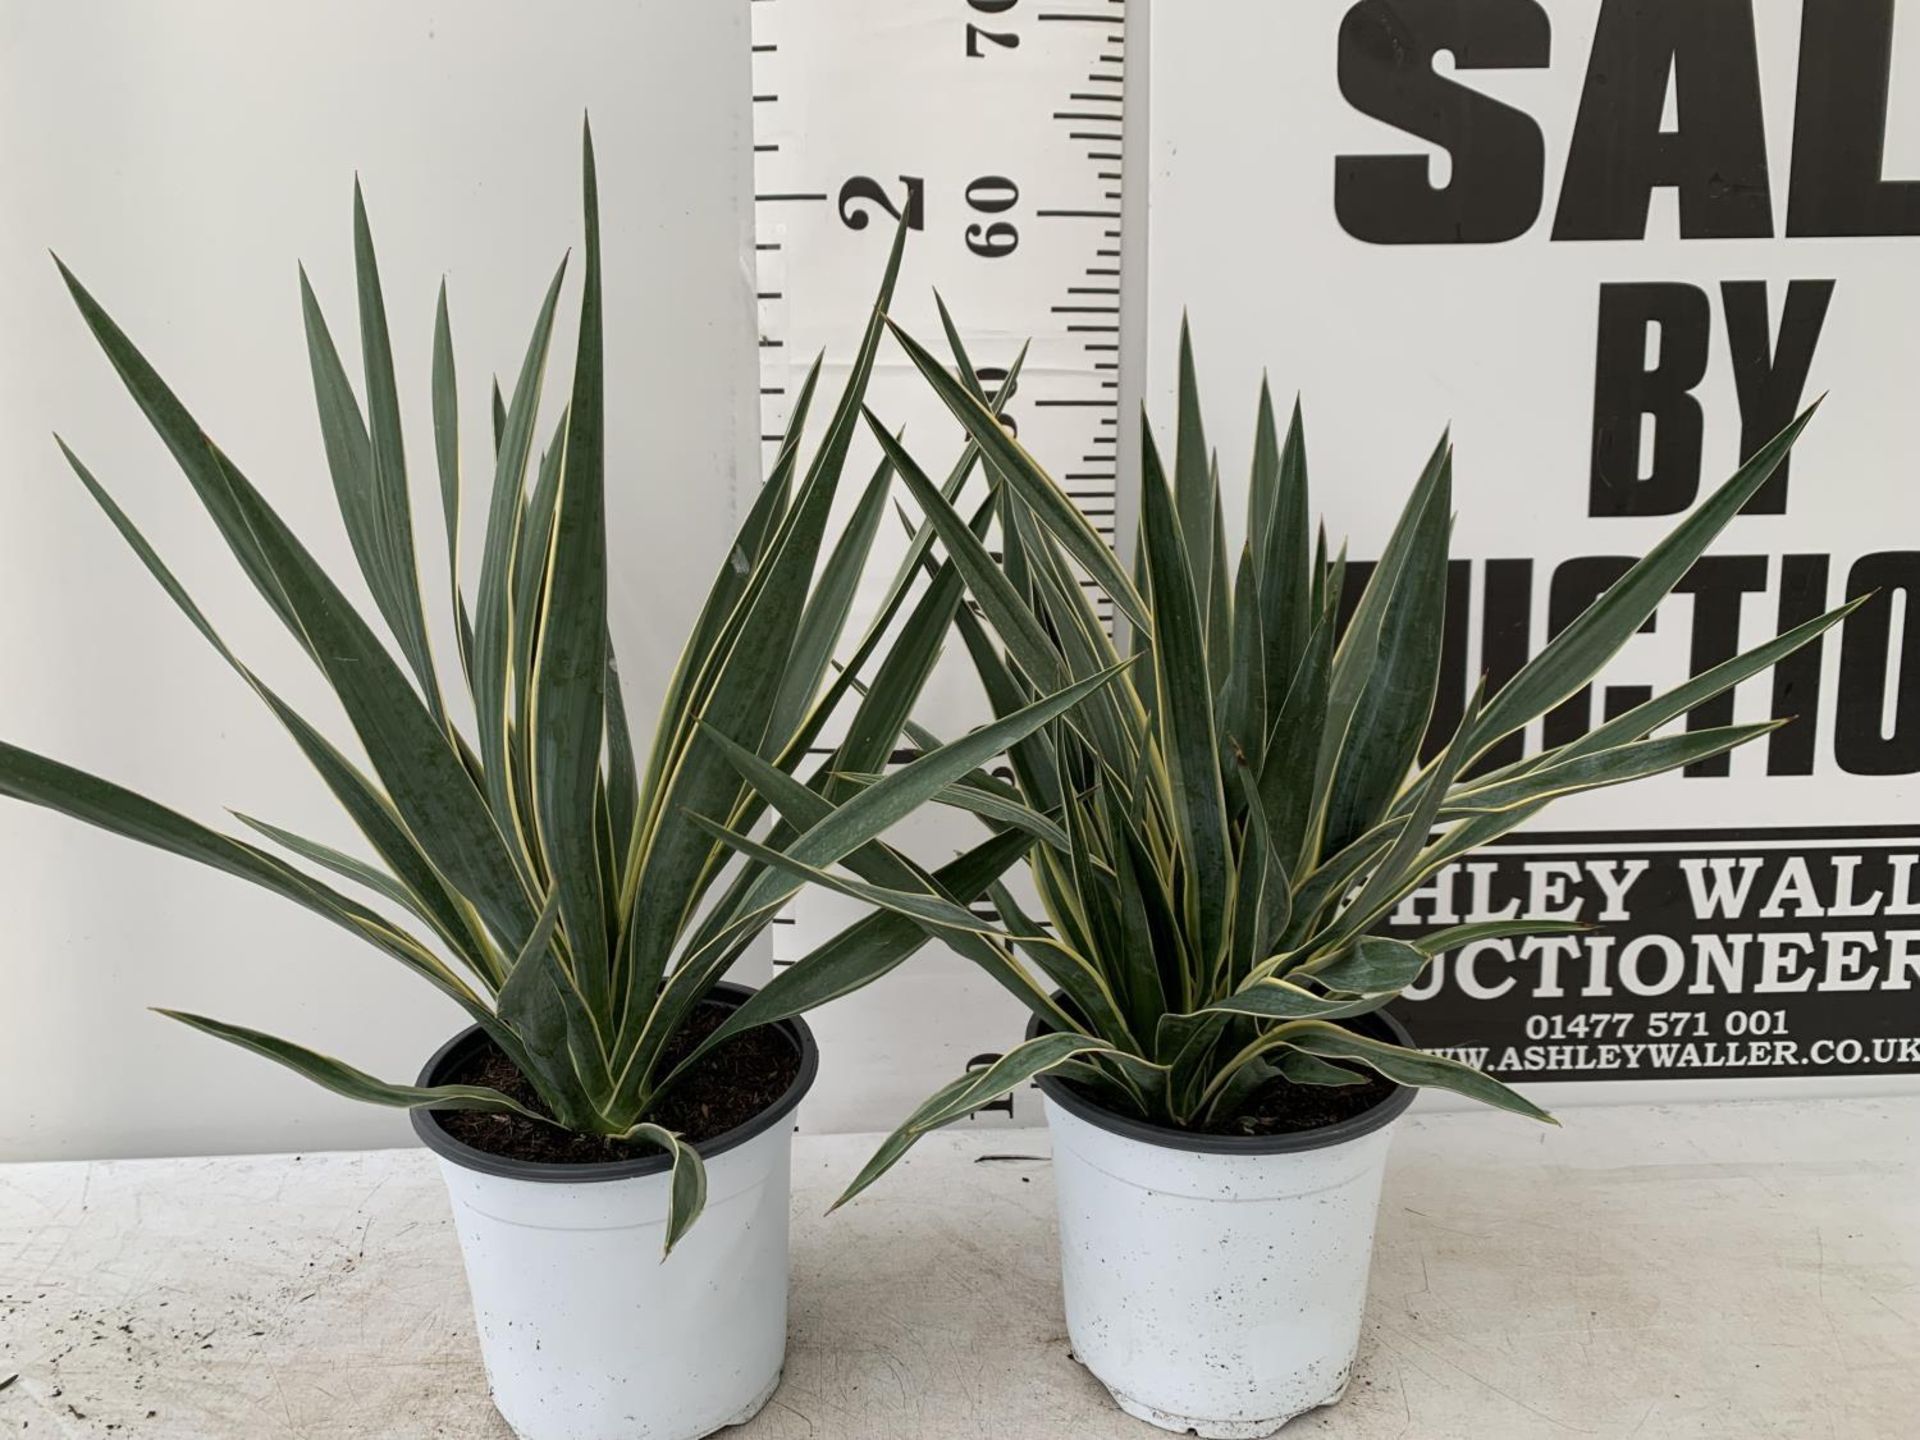 TWO YUCCA 60CM IN HEIGHT IN 2 LTR POTS PLUS VAT TO BE SOLD FOR THE TWO